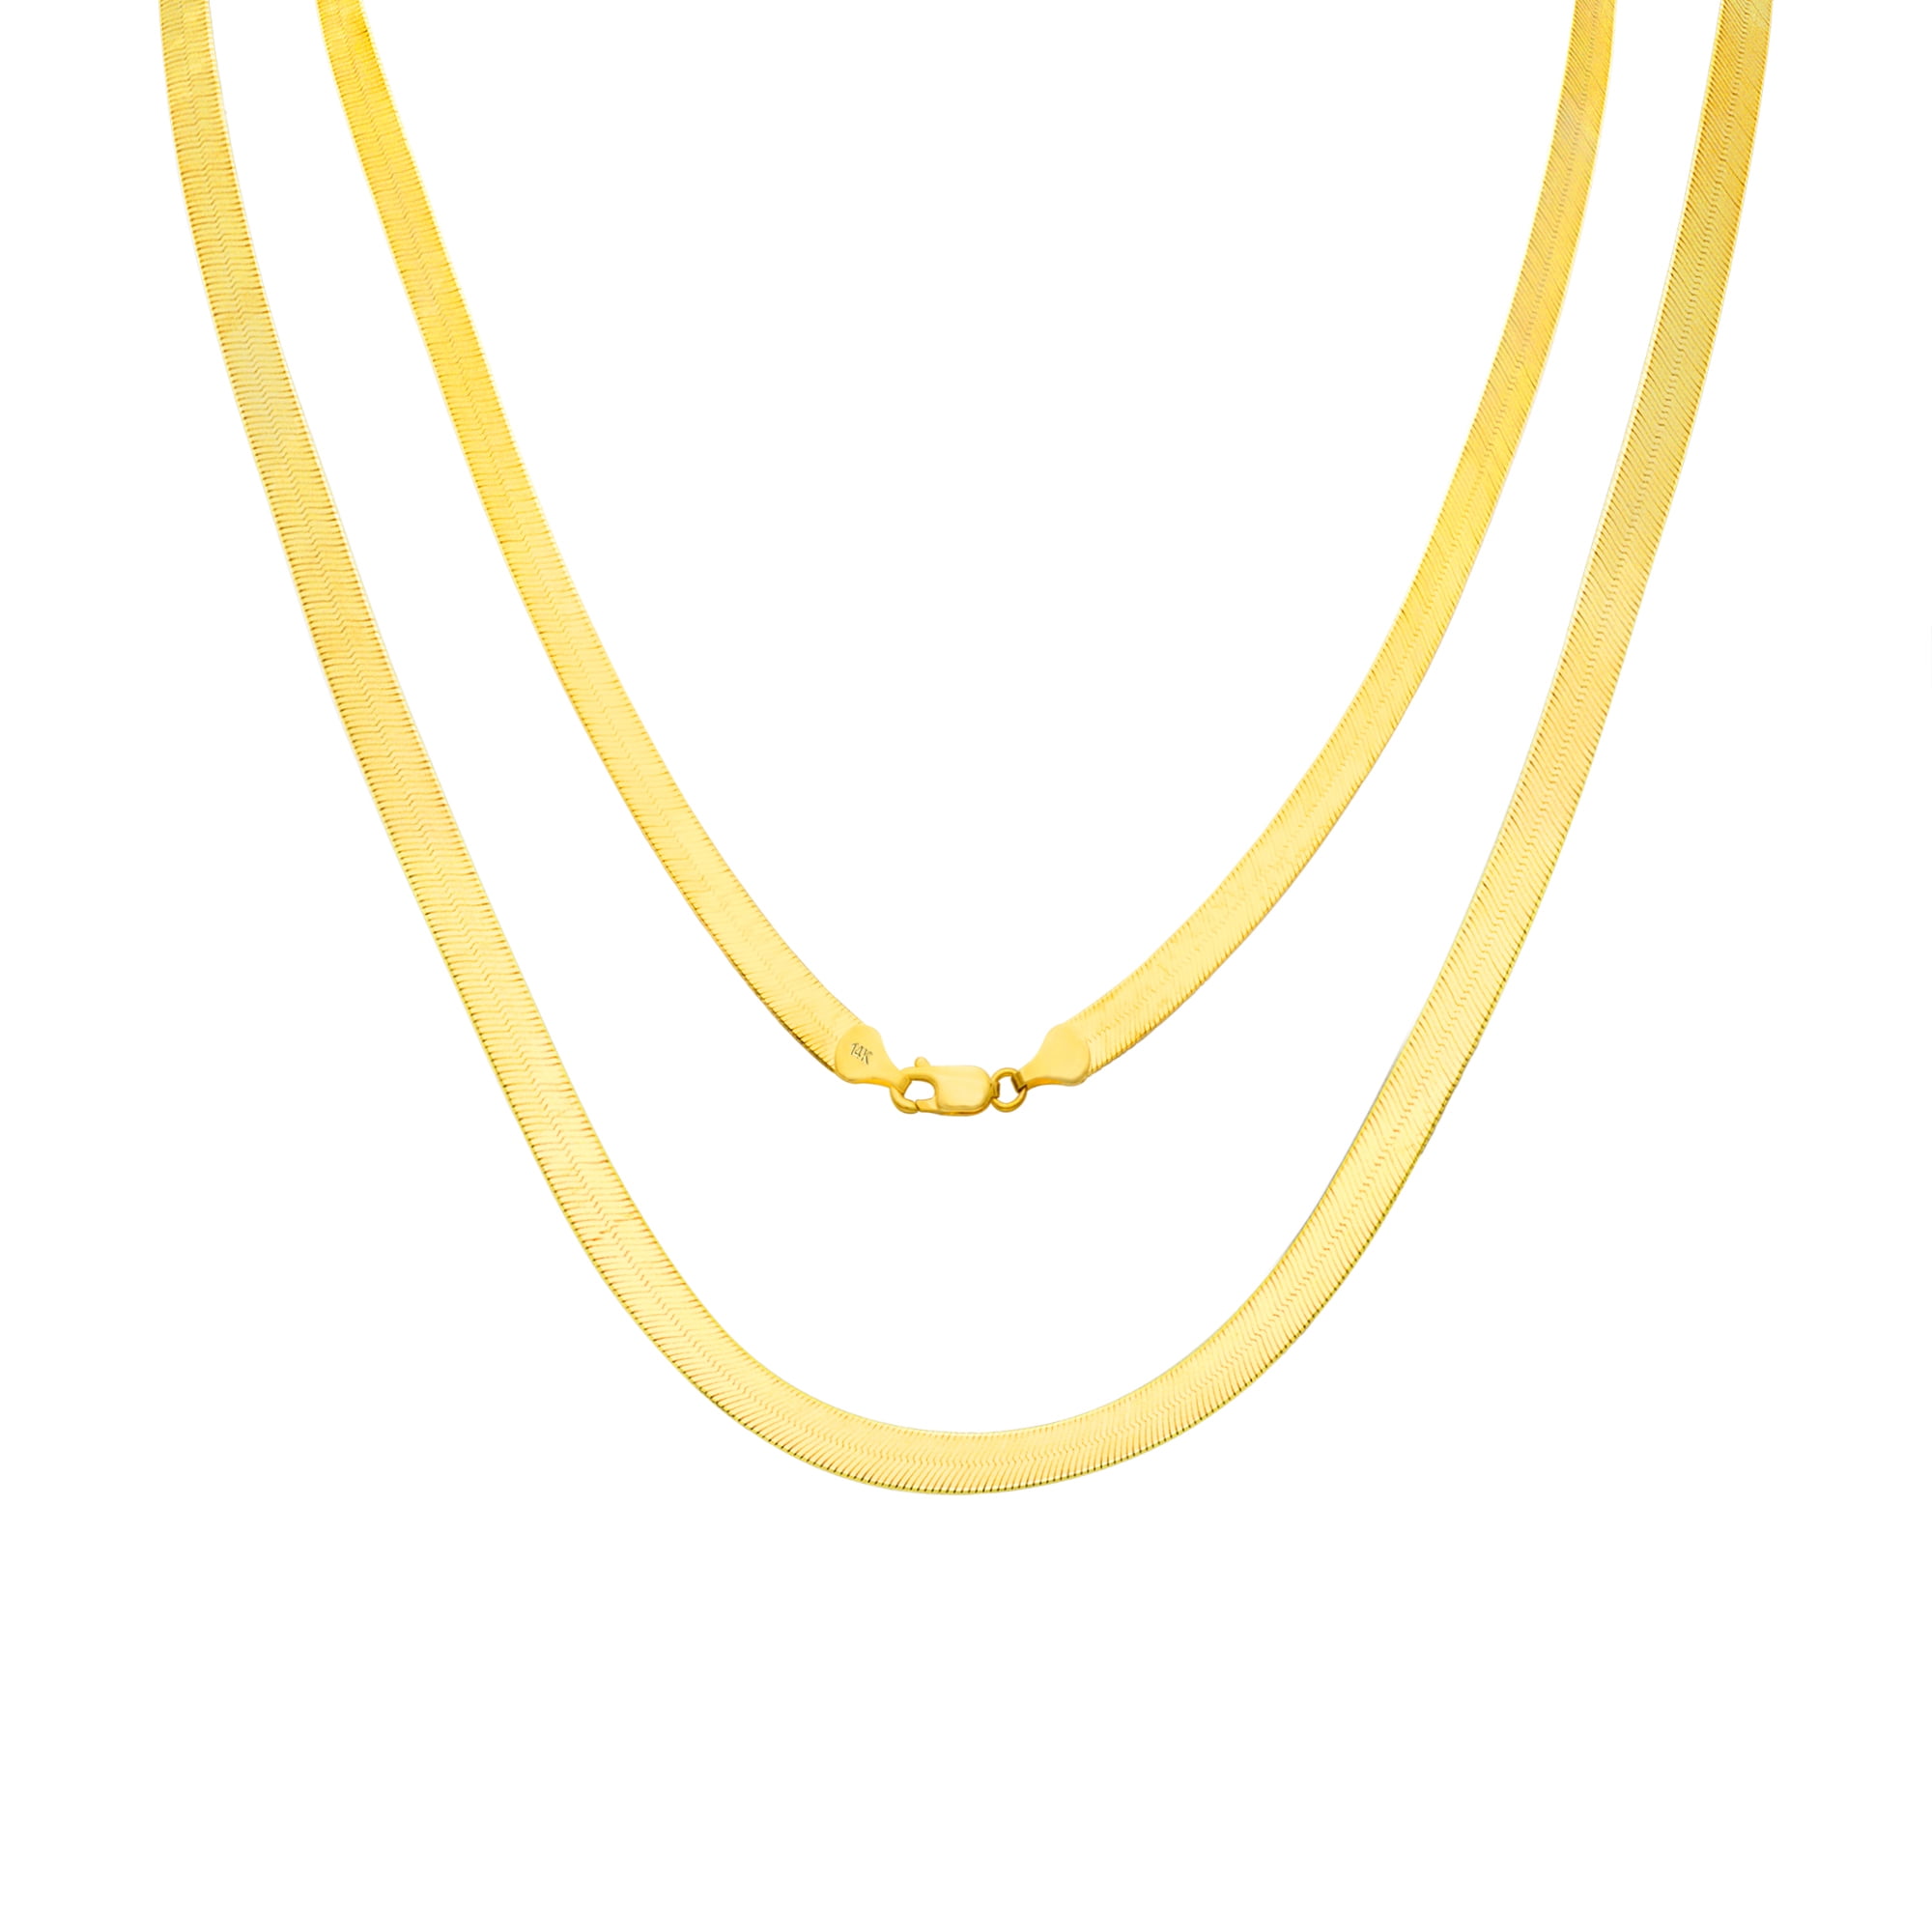 14K Solid Yellow Gold Franco Necklace Chain 1.2mm 16-30" Polish Link Women Men